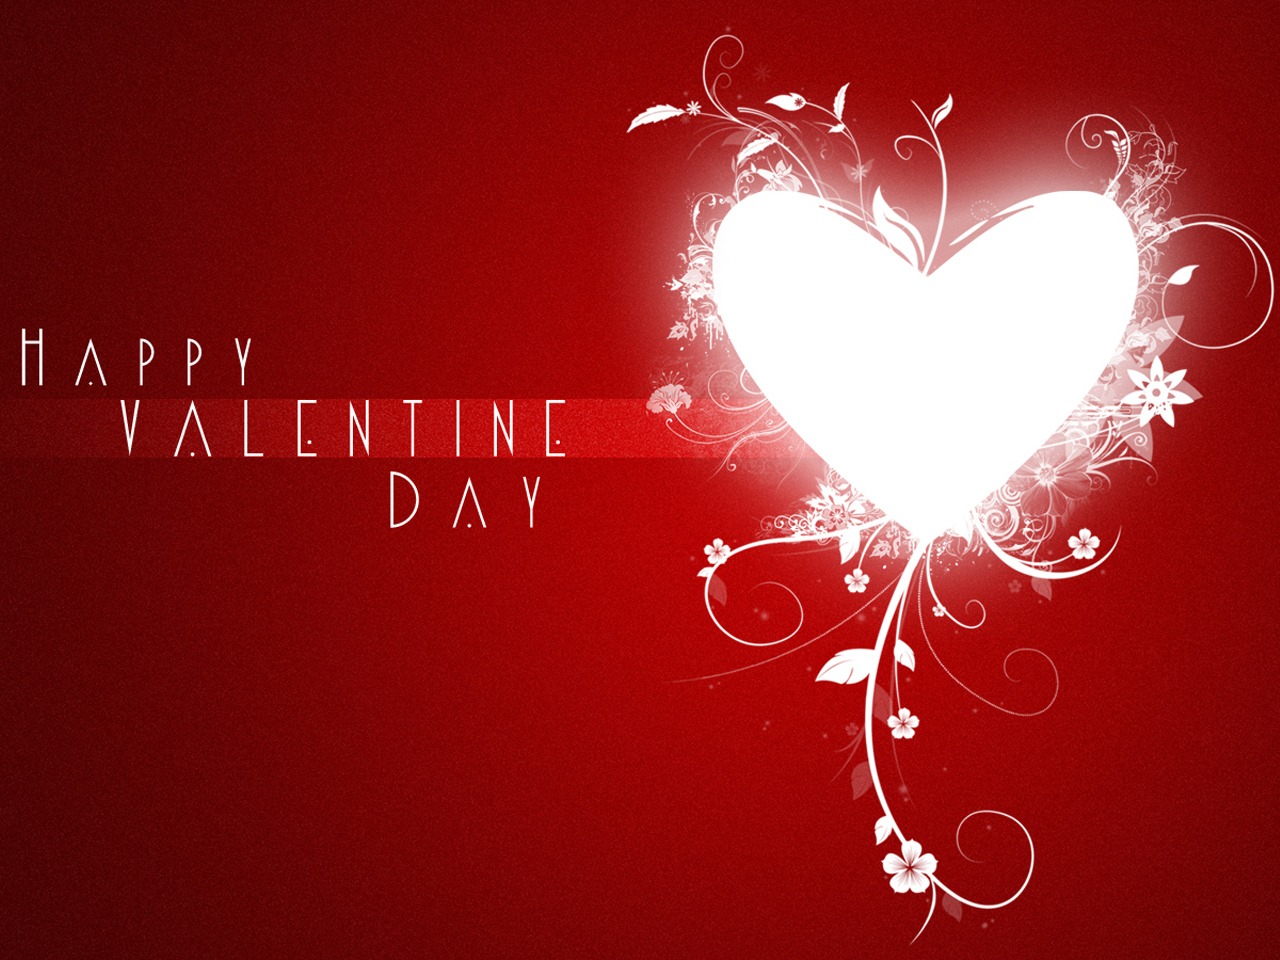 Timeline Greeting Card Valentine S Day Heart Image HD Wallpaper